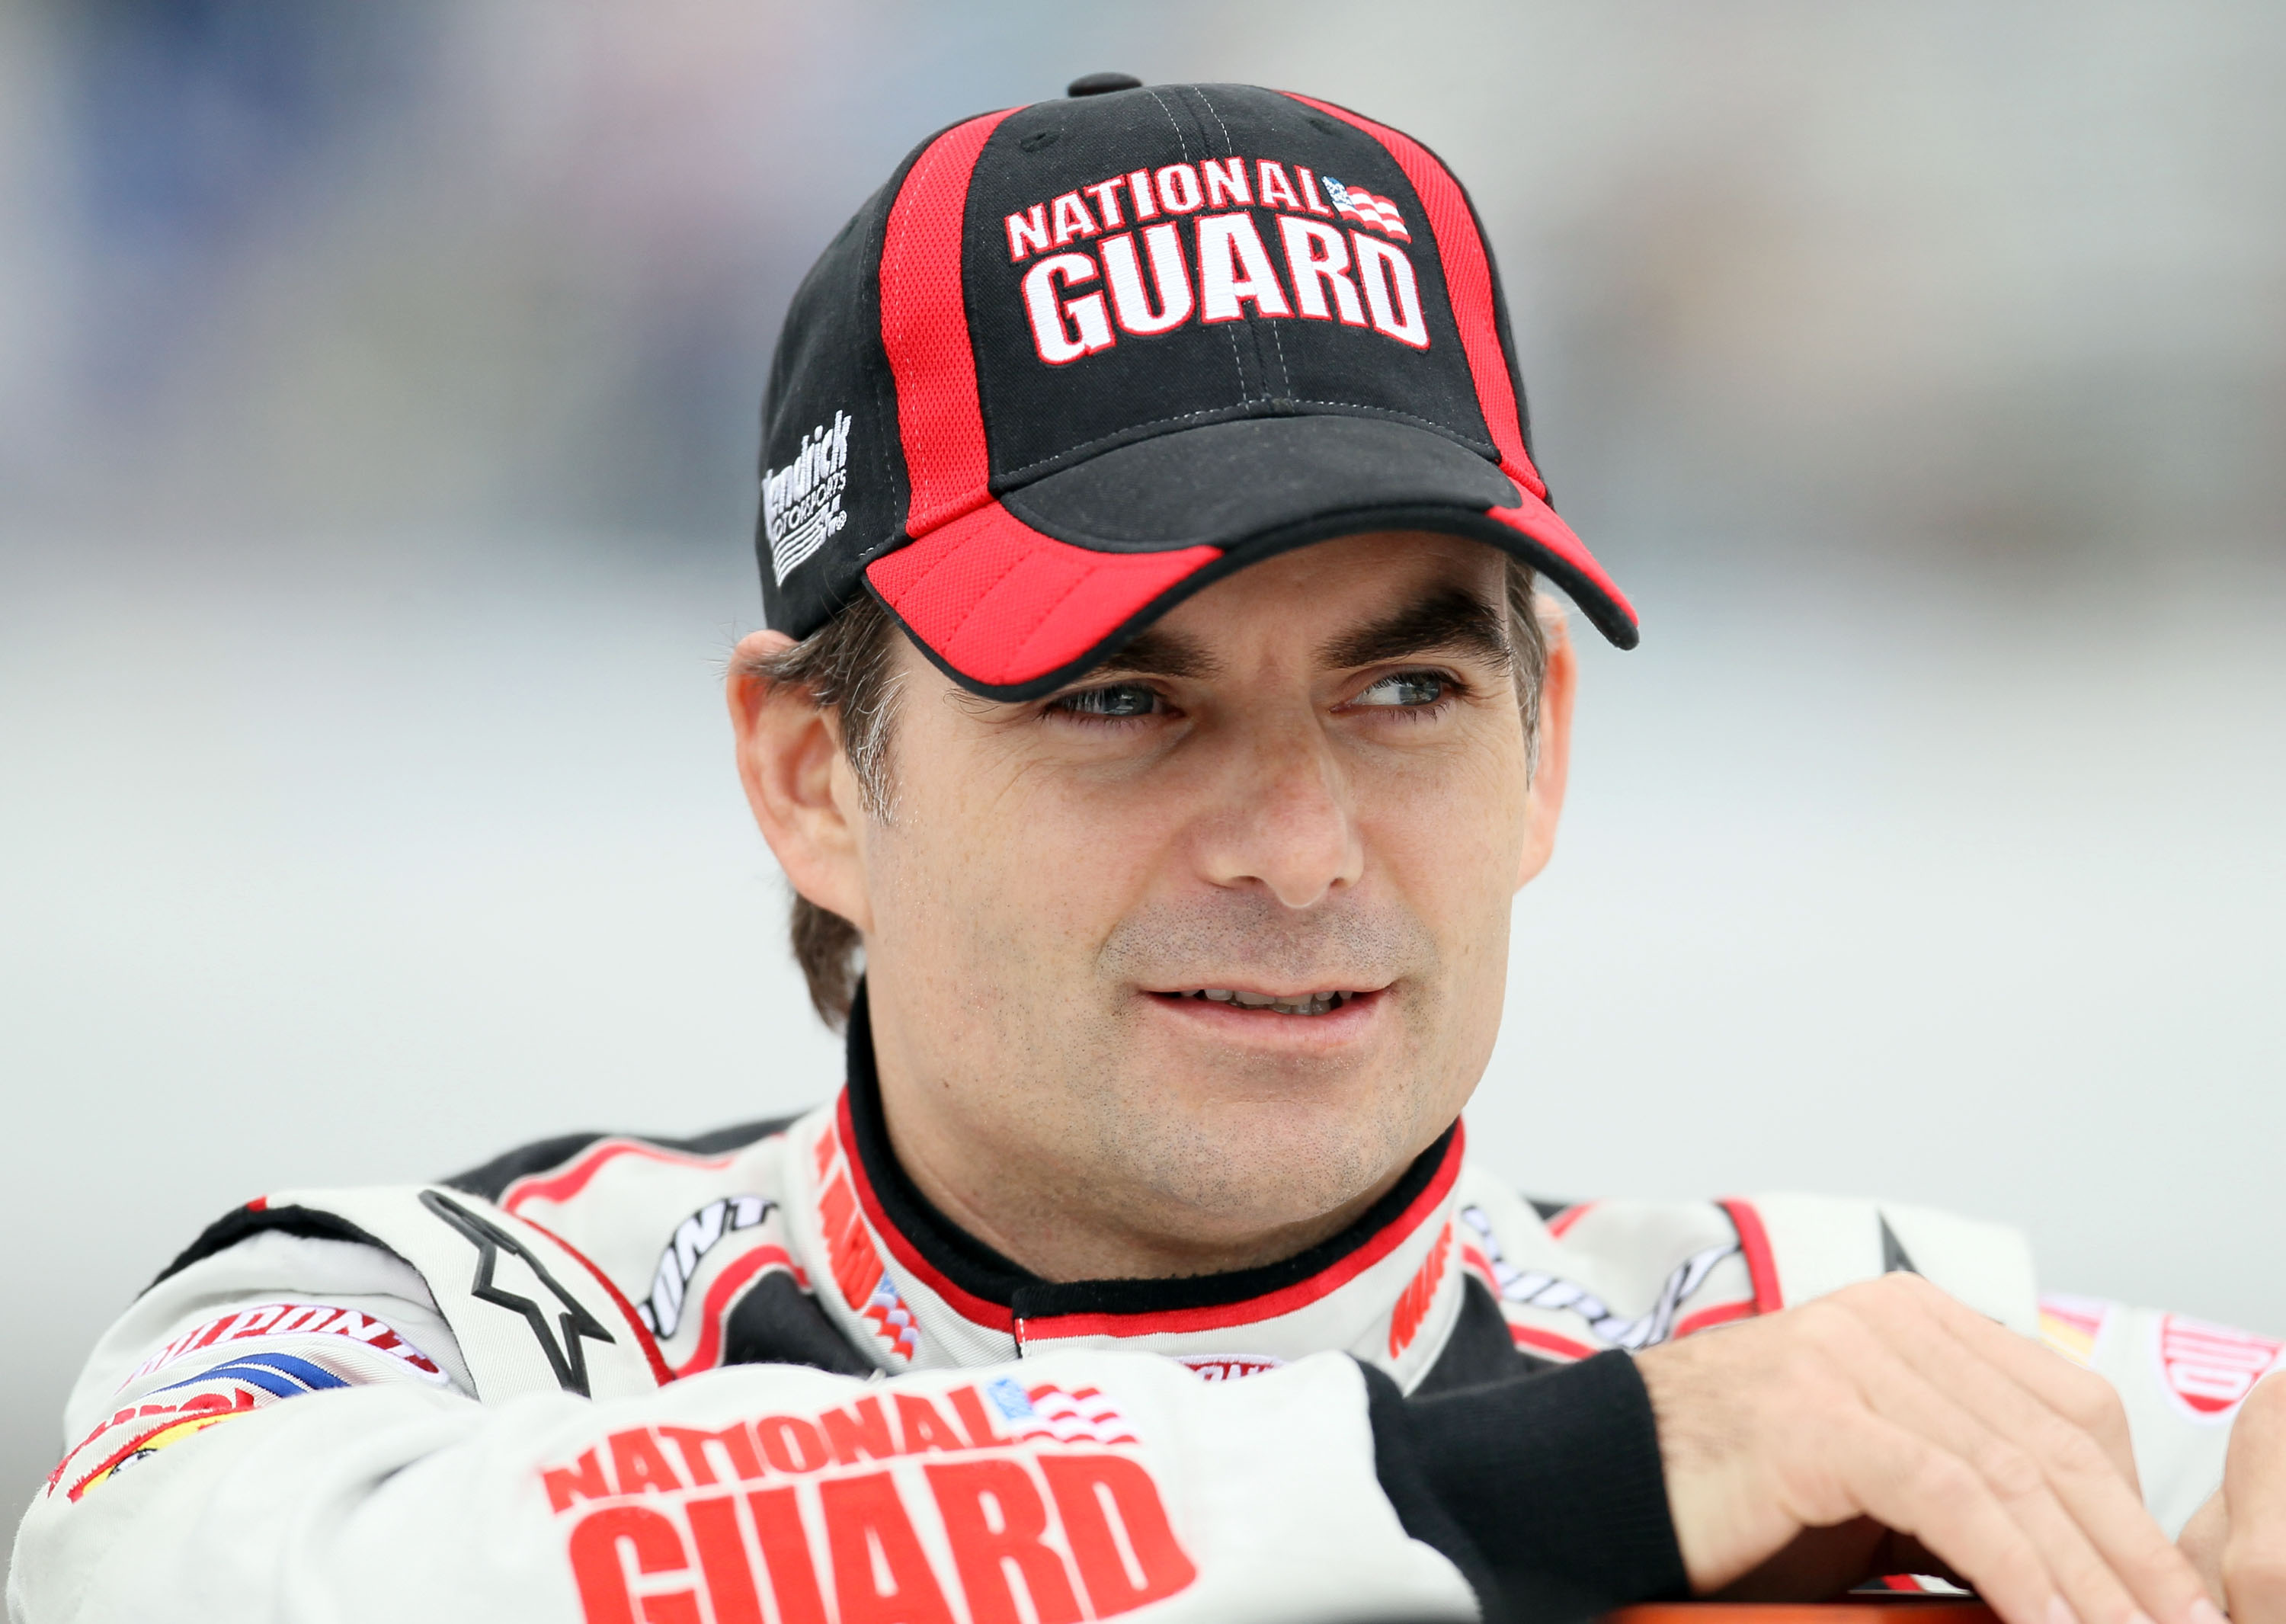 LOUDON, NH - SEPTEMBER 17:  Jeff Gordon, driver of the #24 DuPont National Guard Facebook Chevrolet, stands near his car during qualifying for the NASCAR Sprint Cup Series Sylvania 300 at New Hampshire Motor Speedway on September 17, 2010 in Loudon, New H